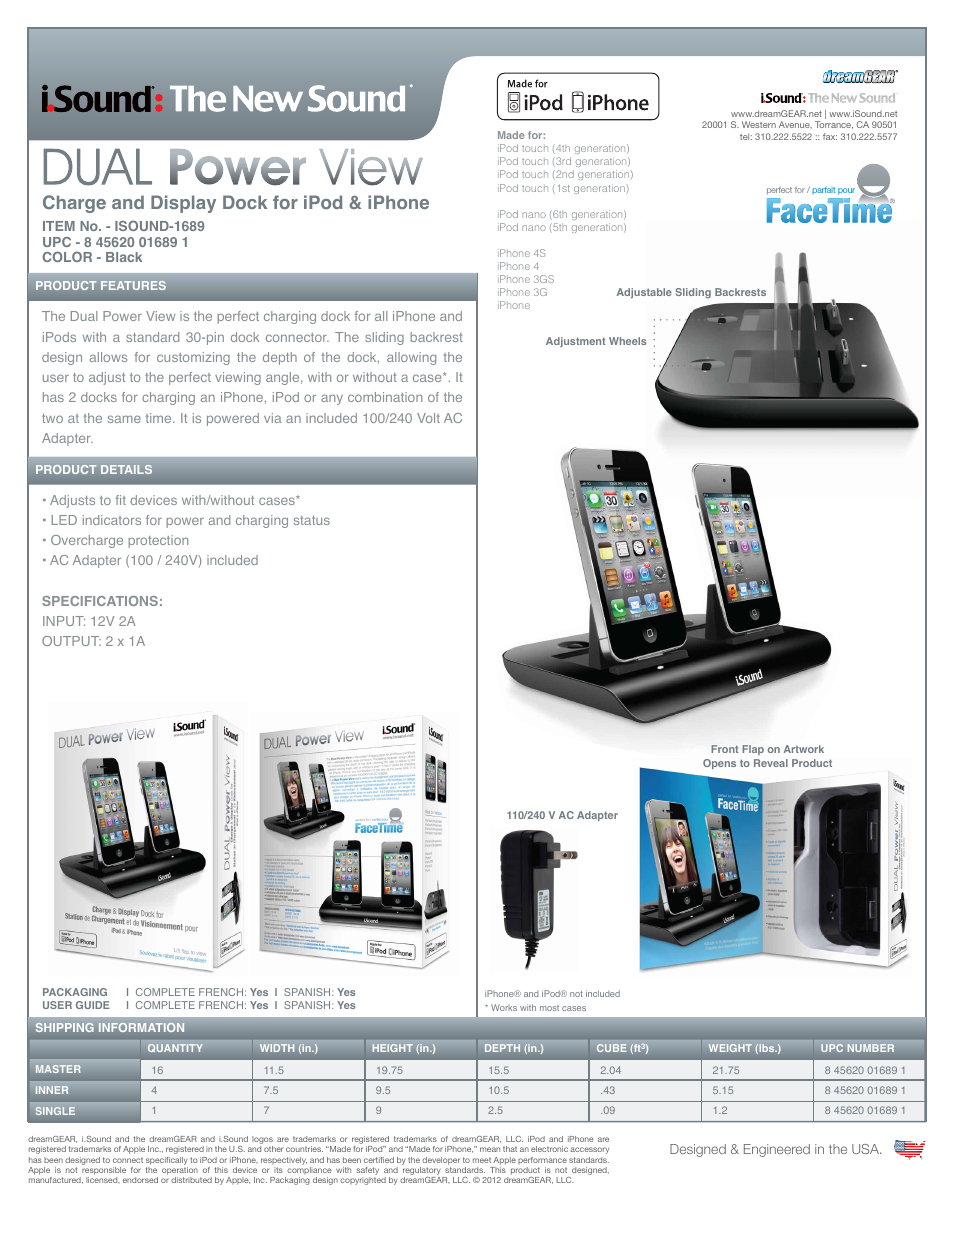 Dual Power View - Sell Sheet